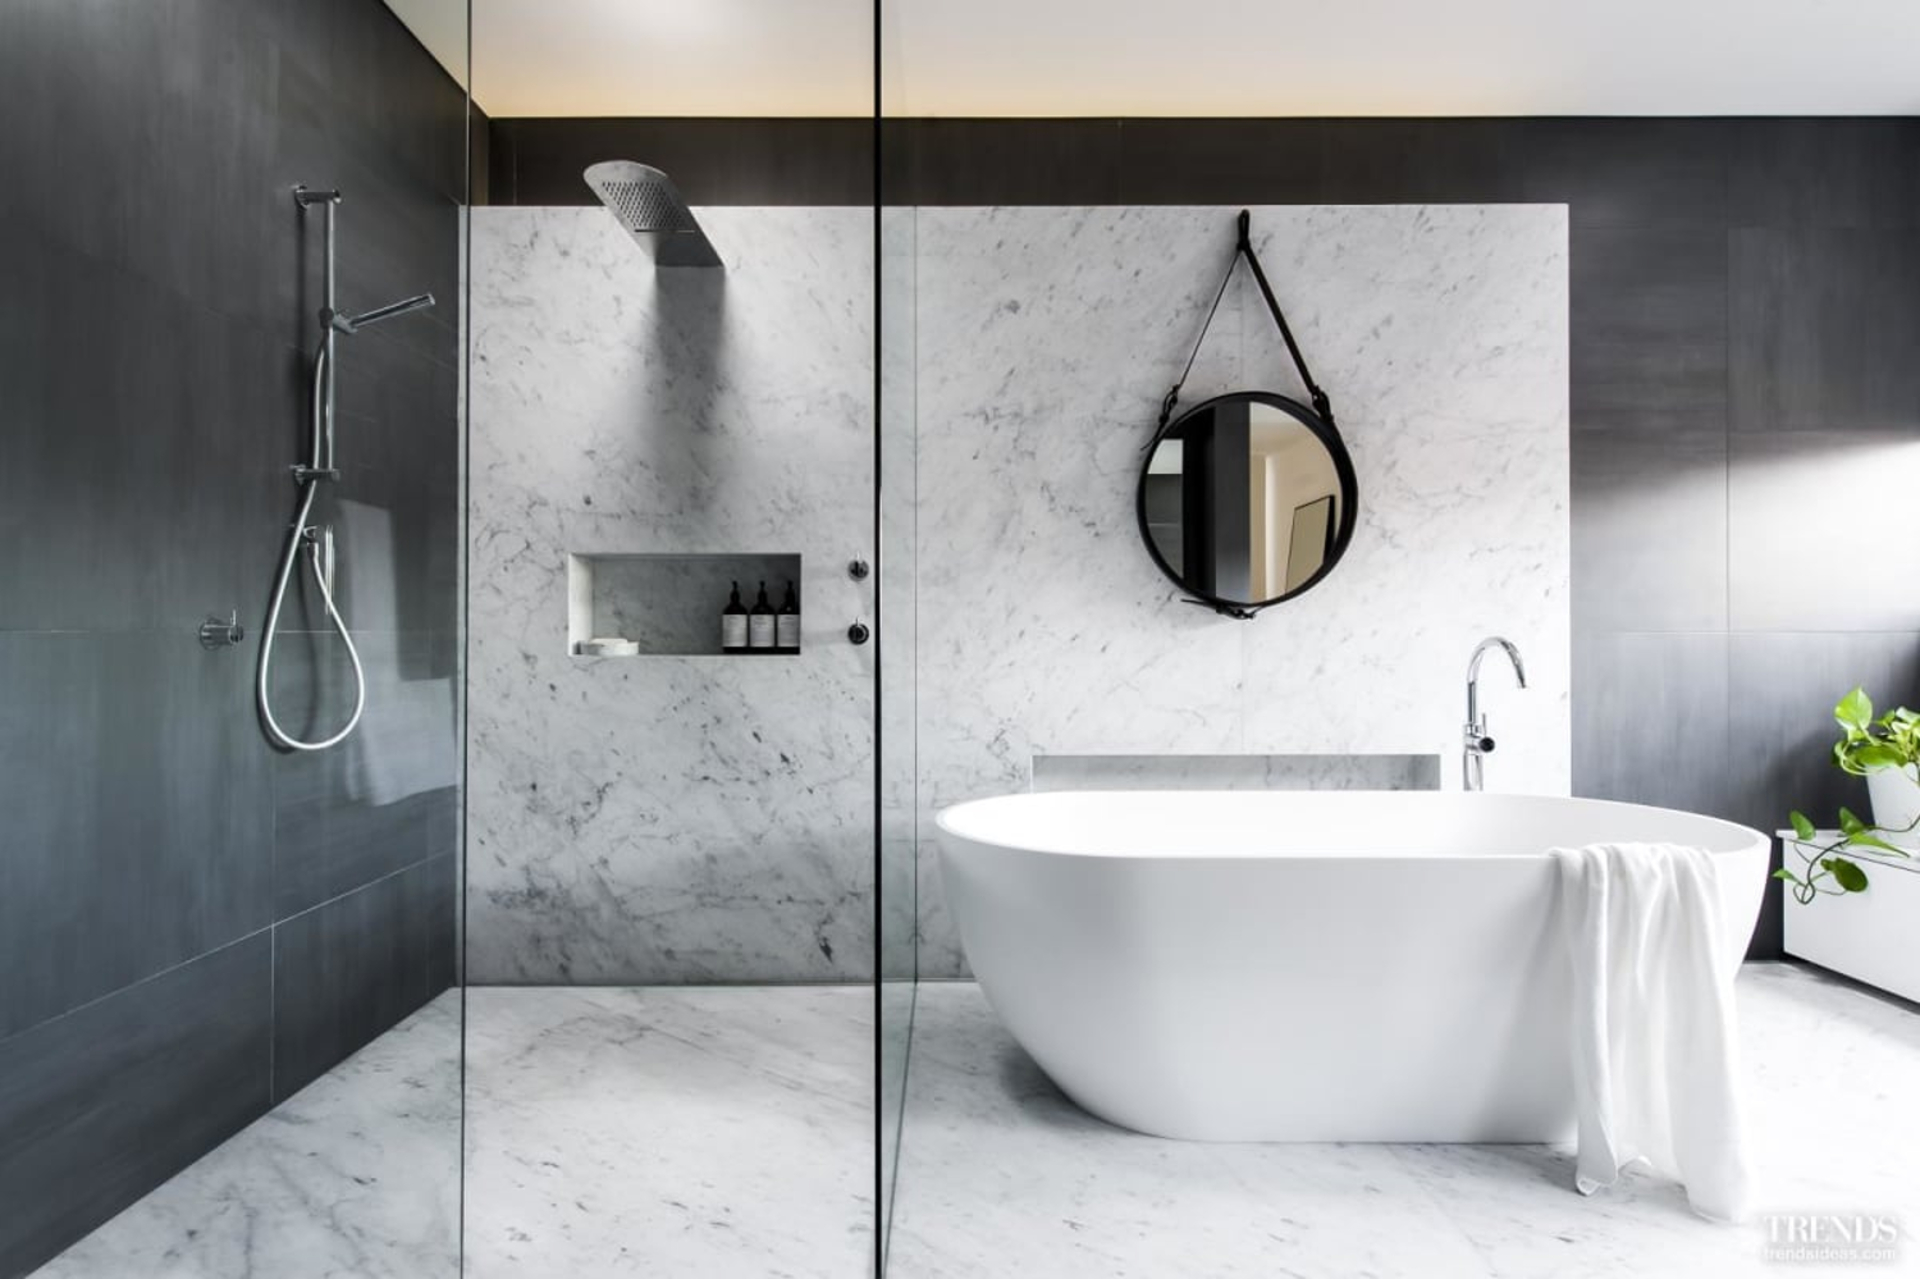 Luxury surfaces, subtle layered lighting with dimmers and a floating shower and bath plinth come together to dramatic effect in this two-toned master ensuite by designer Darren Genner of Minosa.